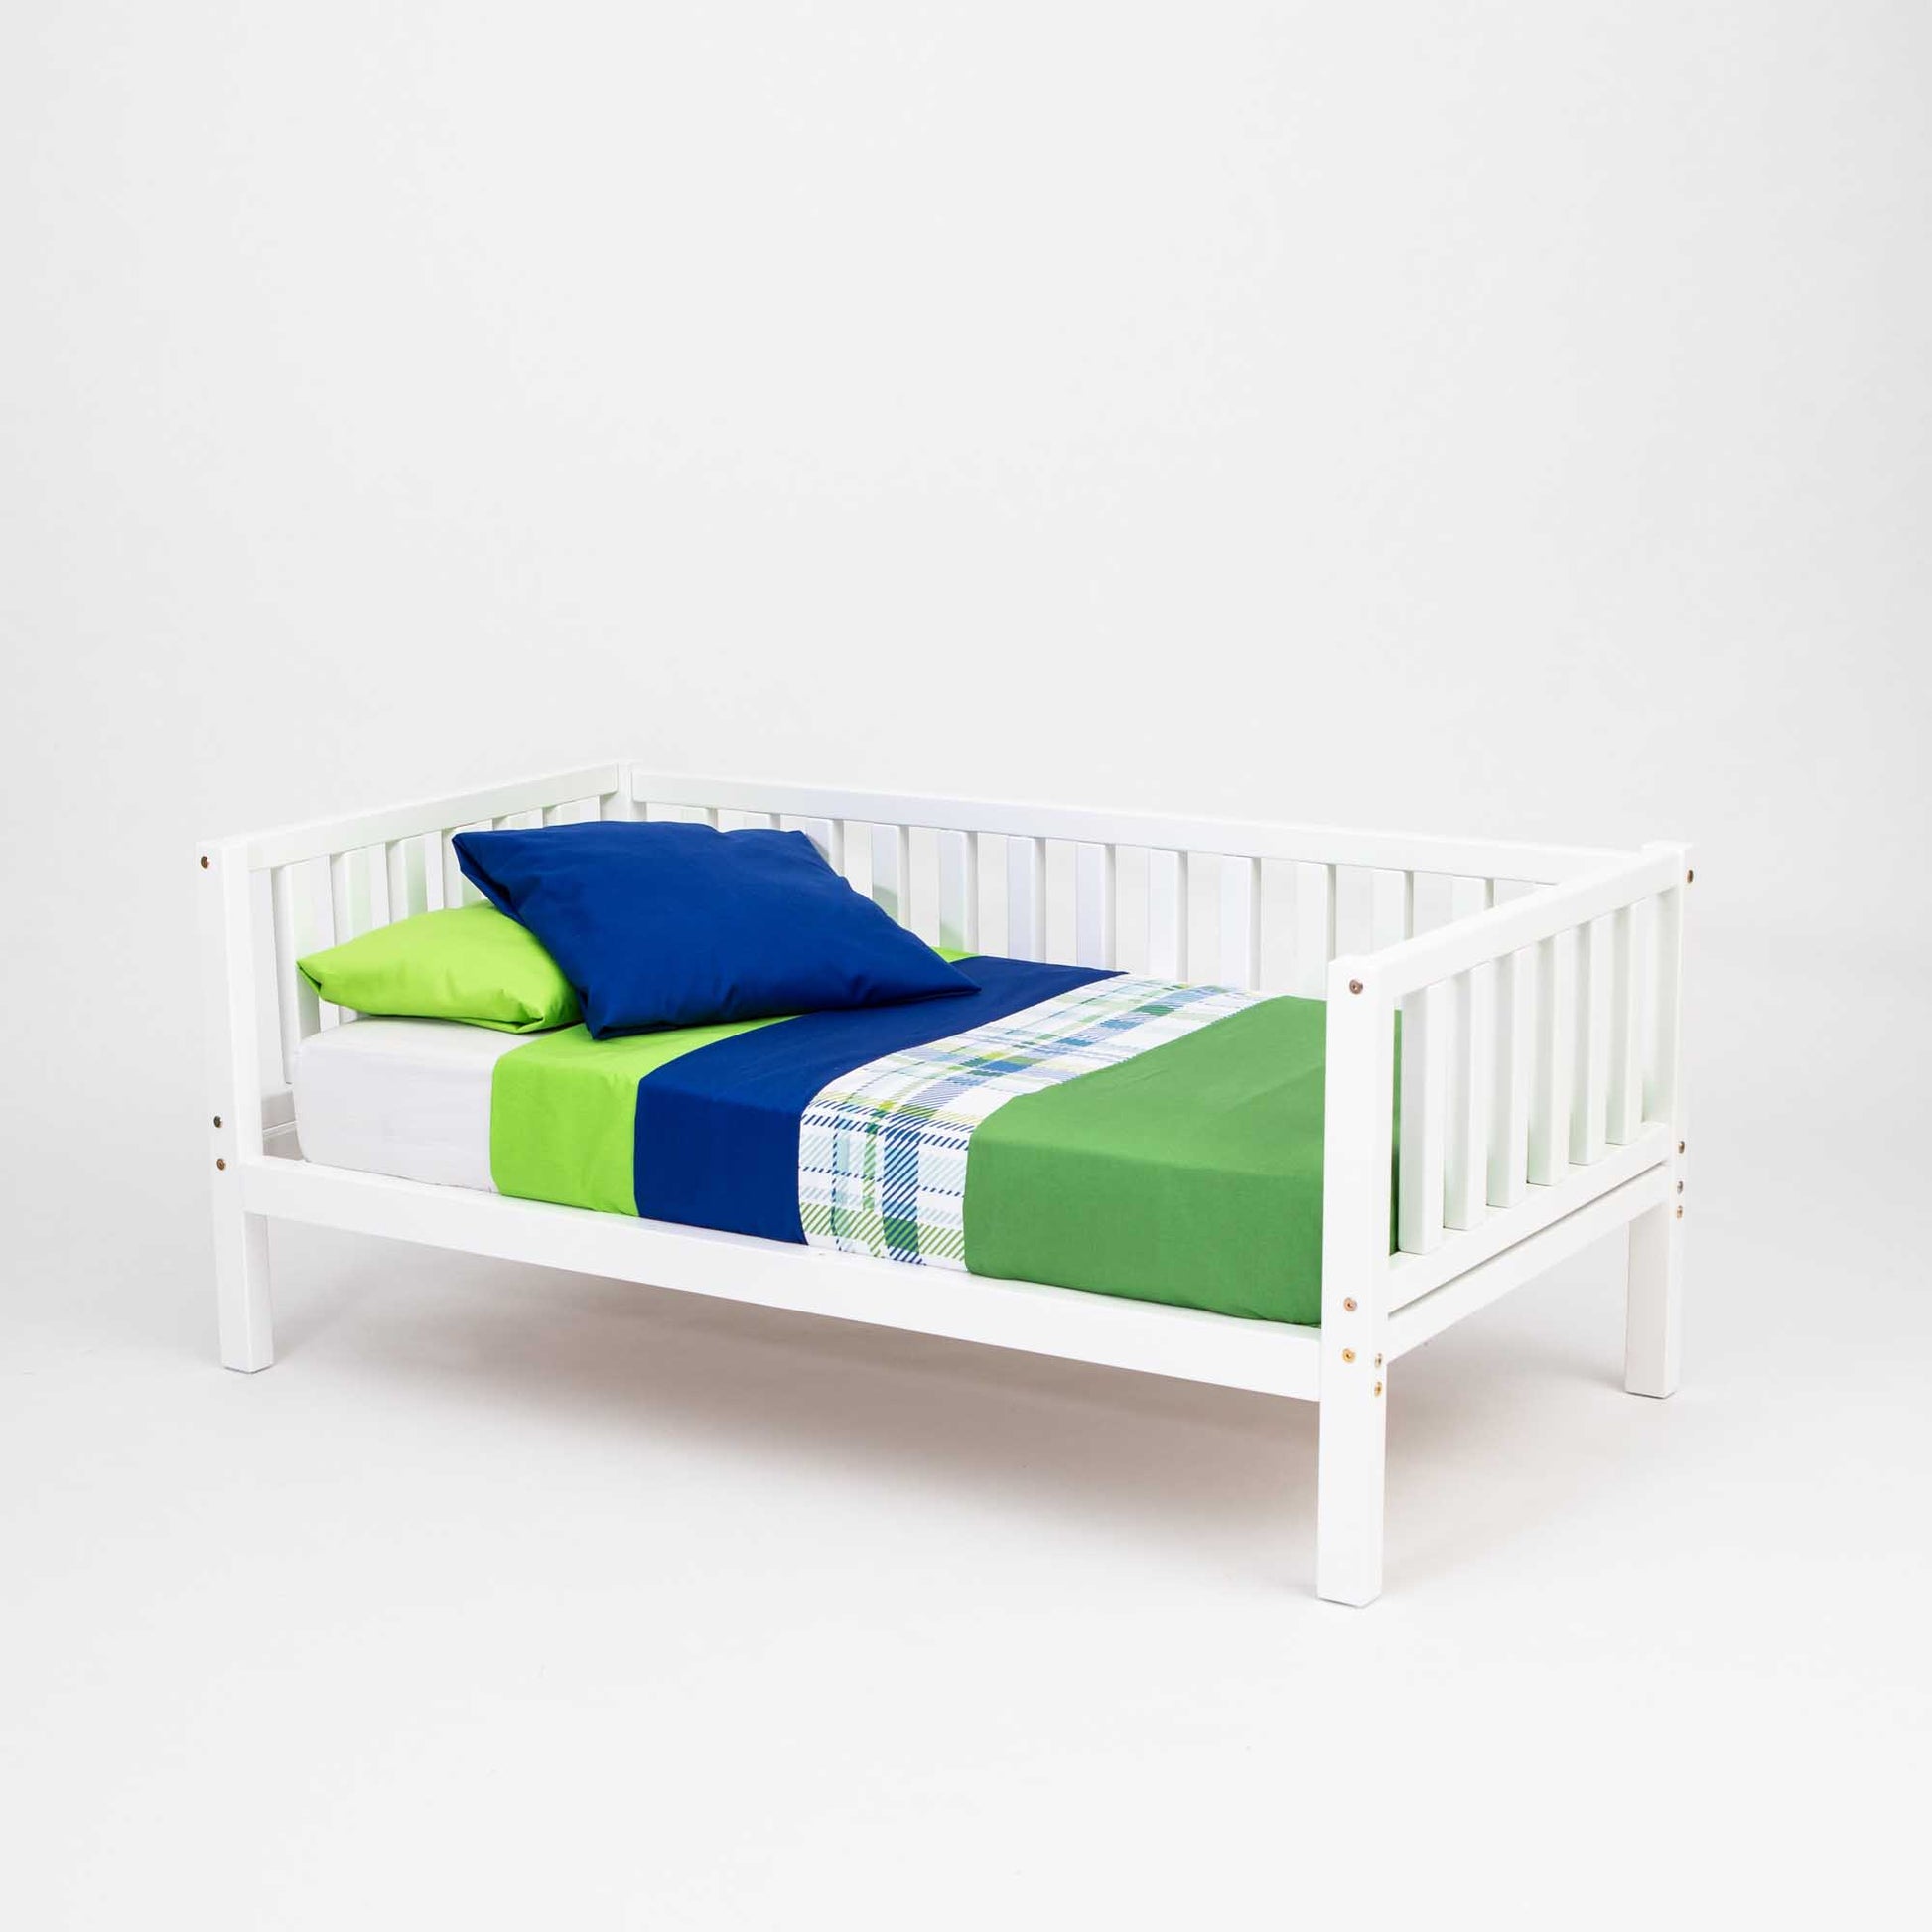 A white wooden 2-in-1 children's bed with green and blue bedding.
Product Name: Sweet Home From Wood's 2-in-1 toddler bed on legs with a 3-sided vertical rail
Brand Name: Sweet Home From Wood